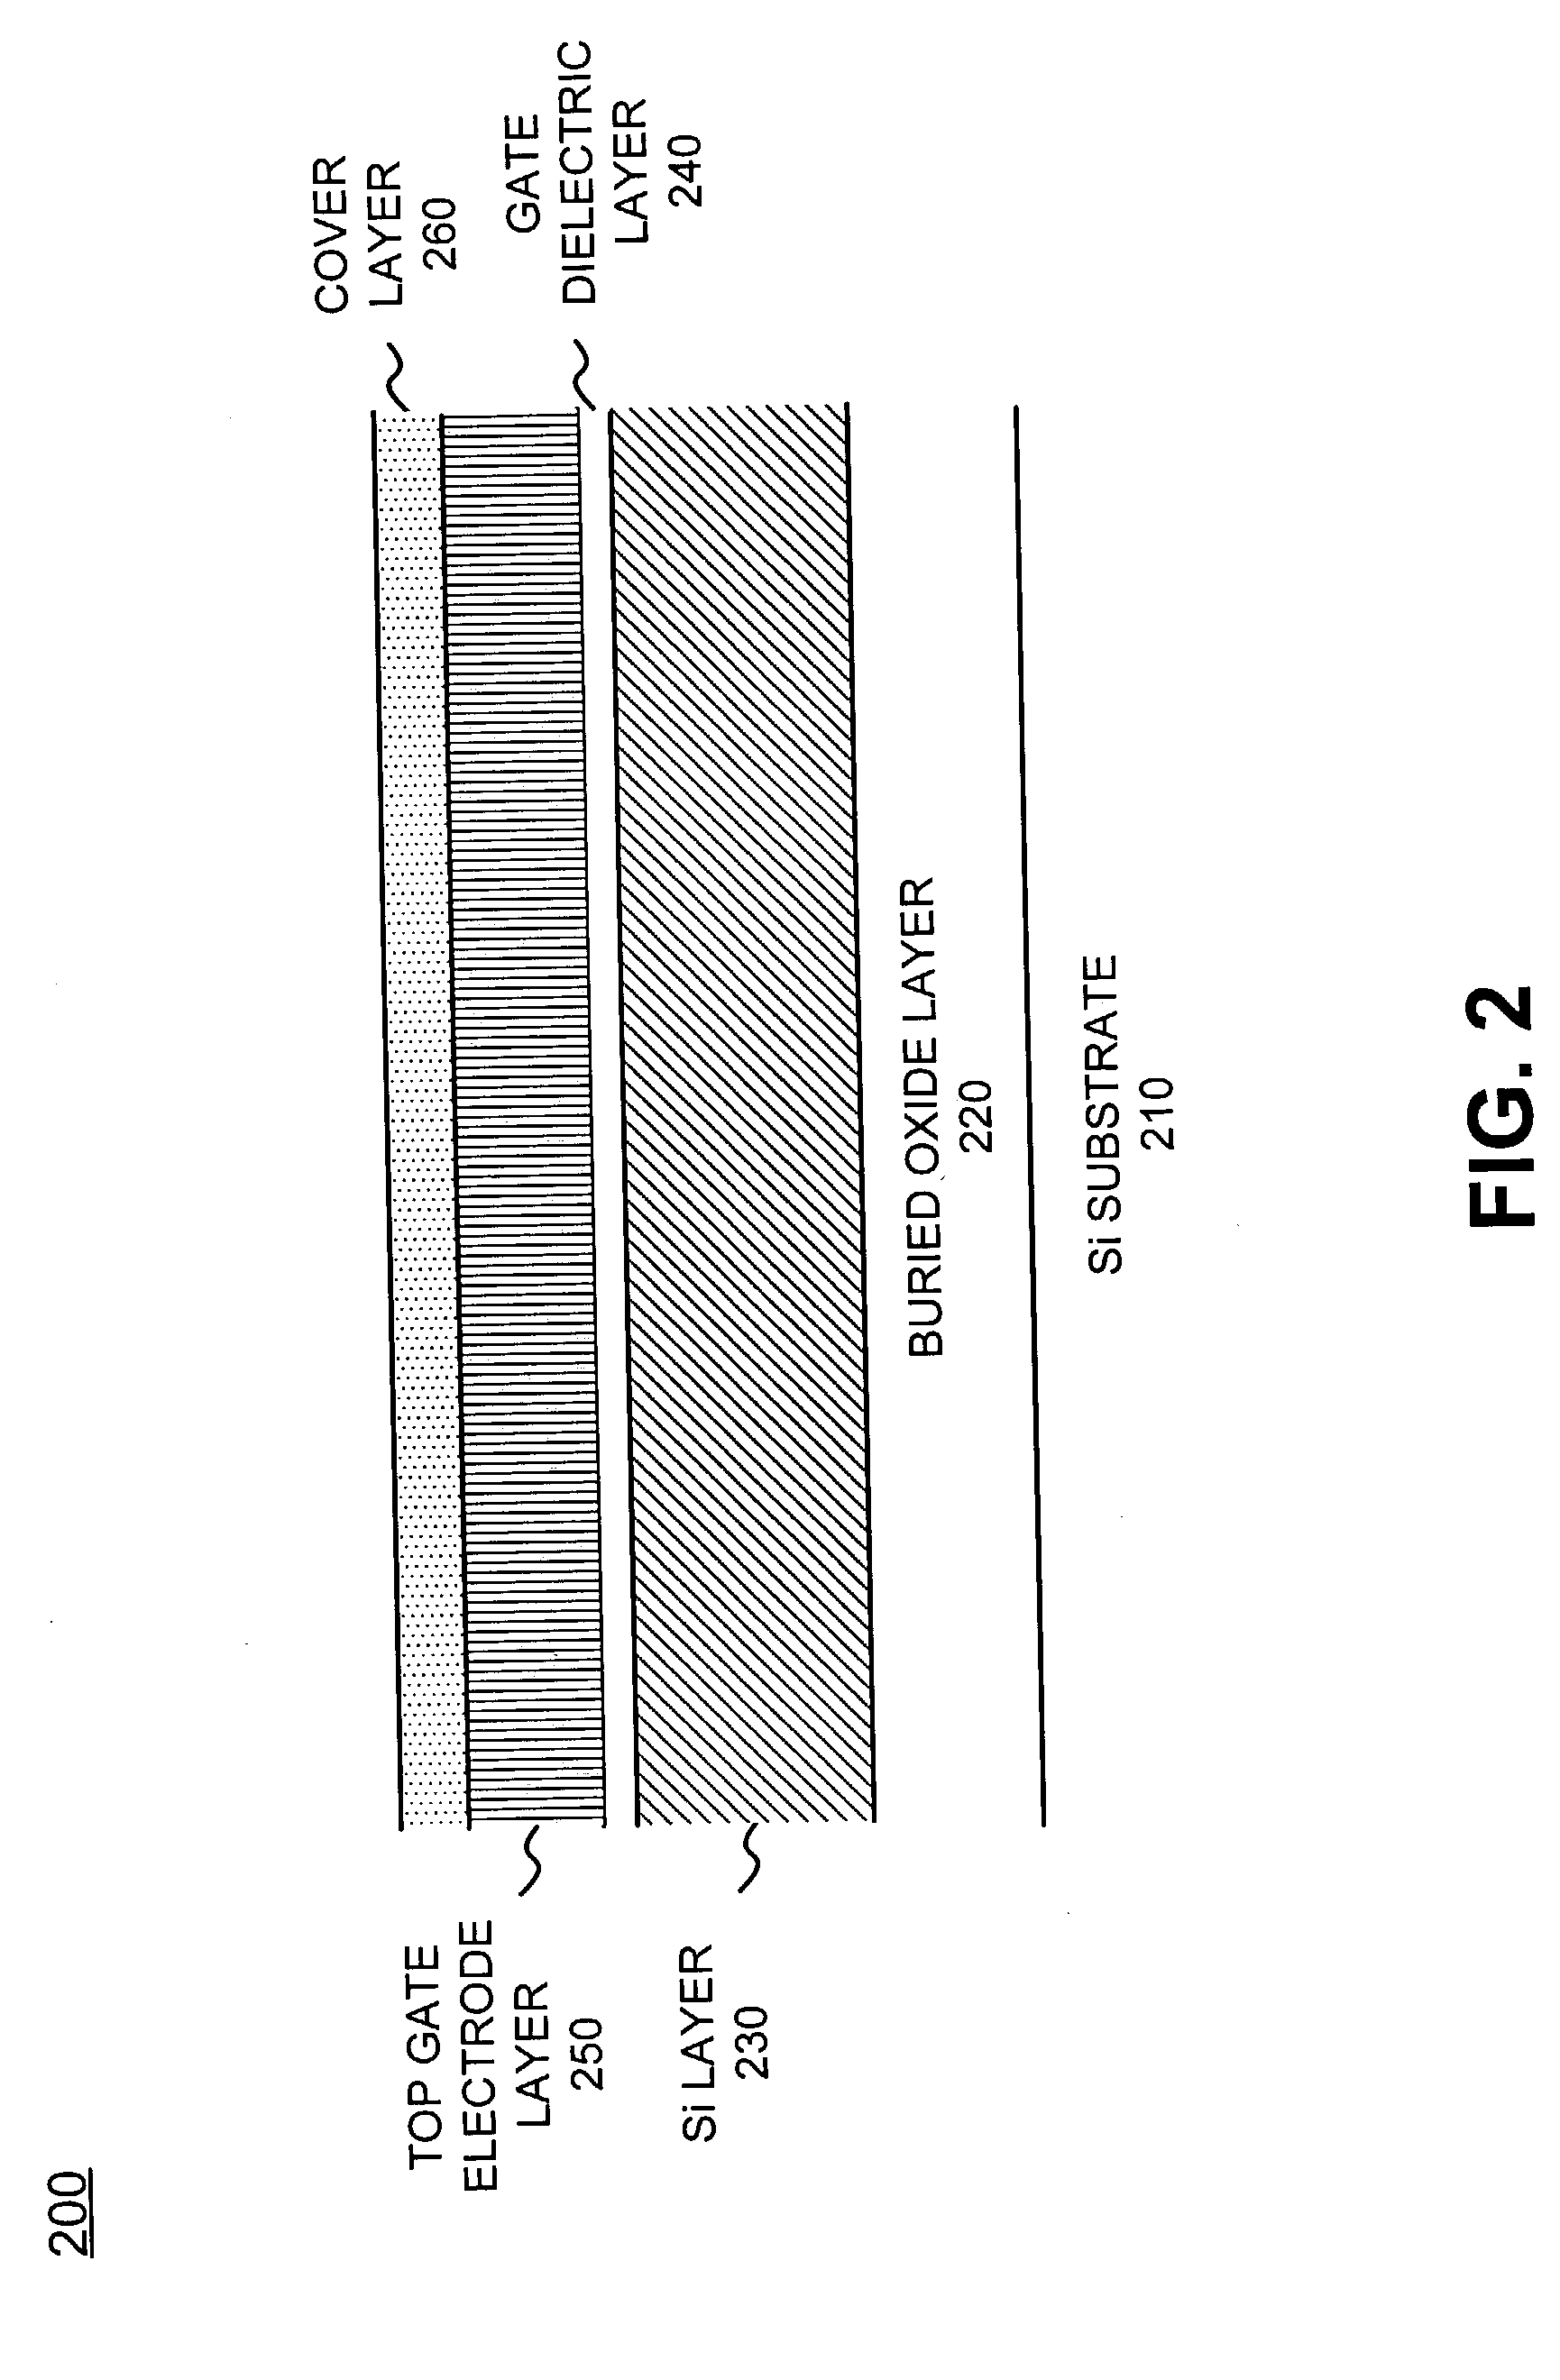 Tri-gate and gate around MOSFET devices and methods for making same